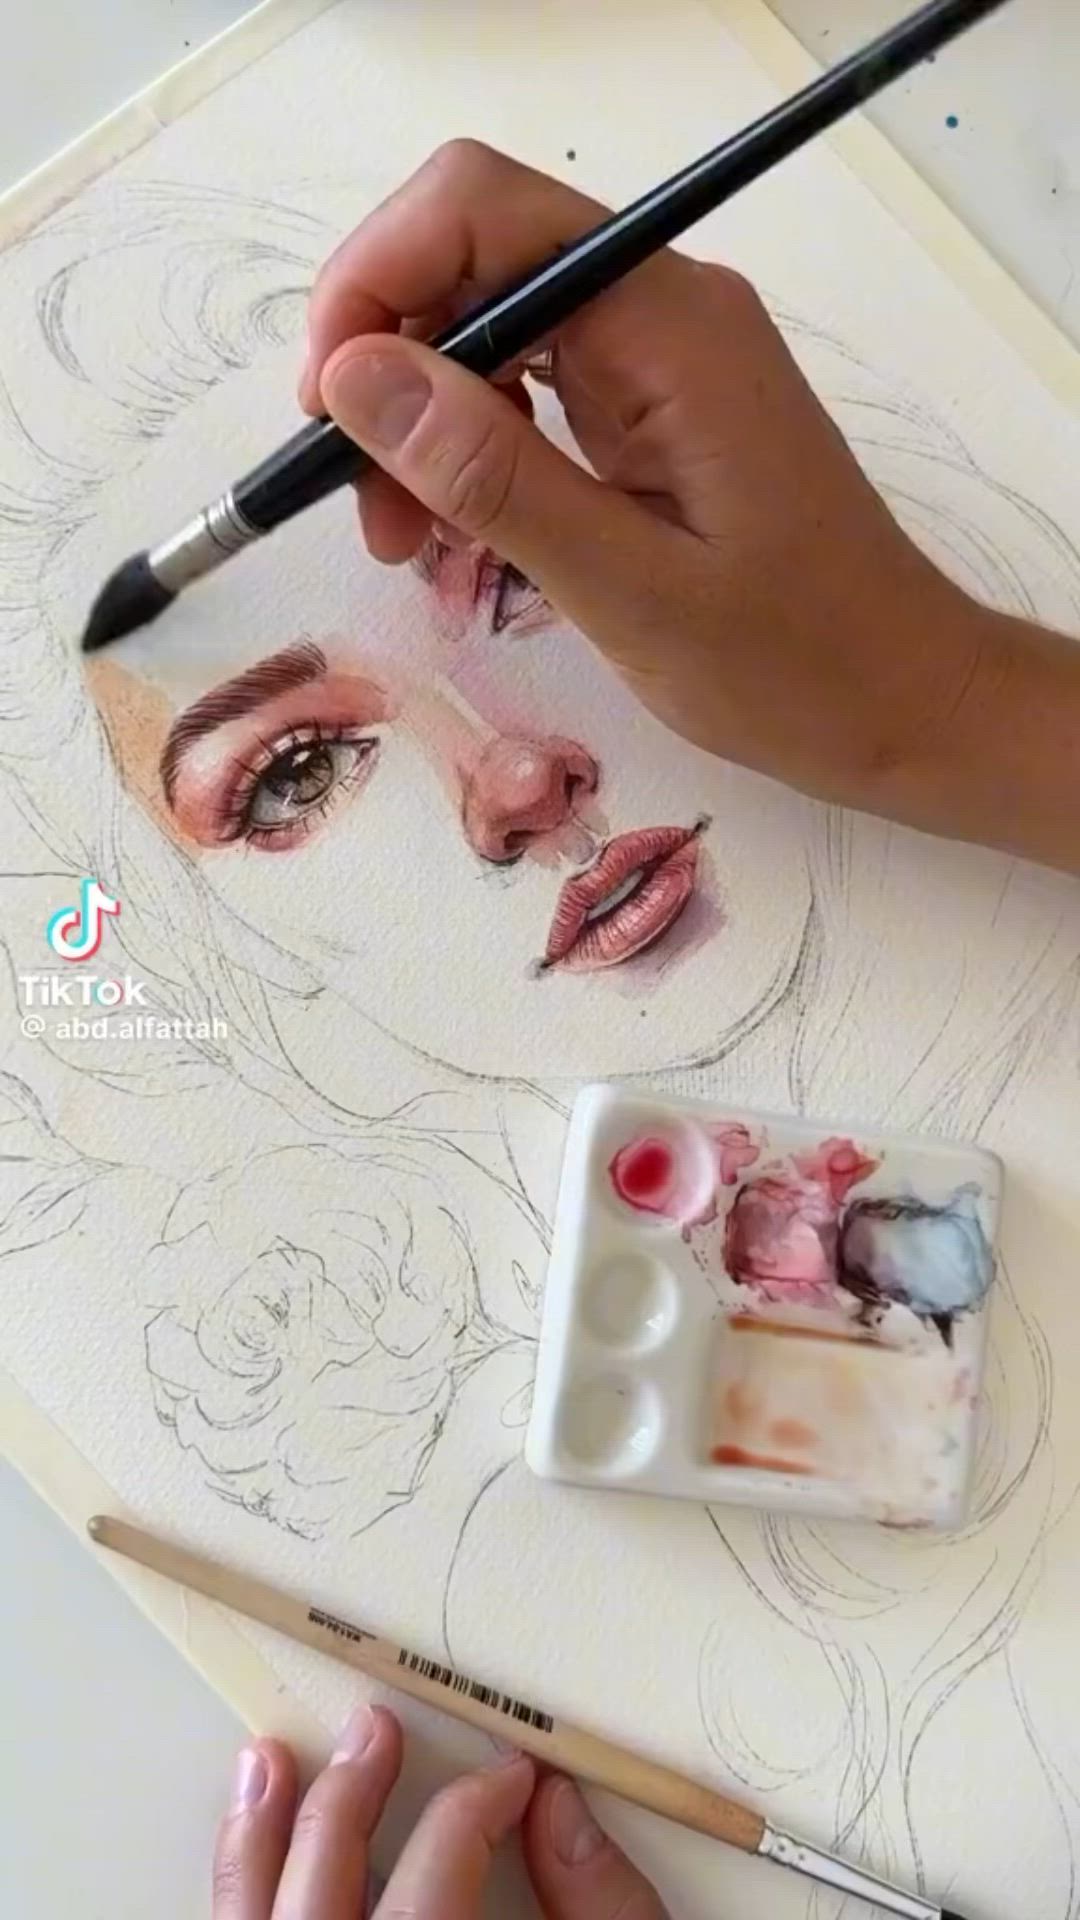 This may contain: a person is drawing on a piece of paper with a brush and watercolor pencils